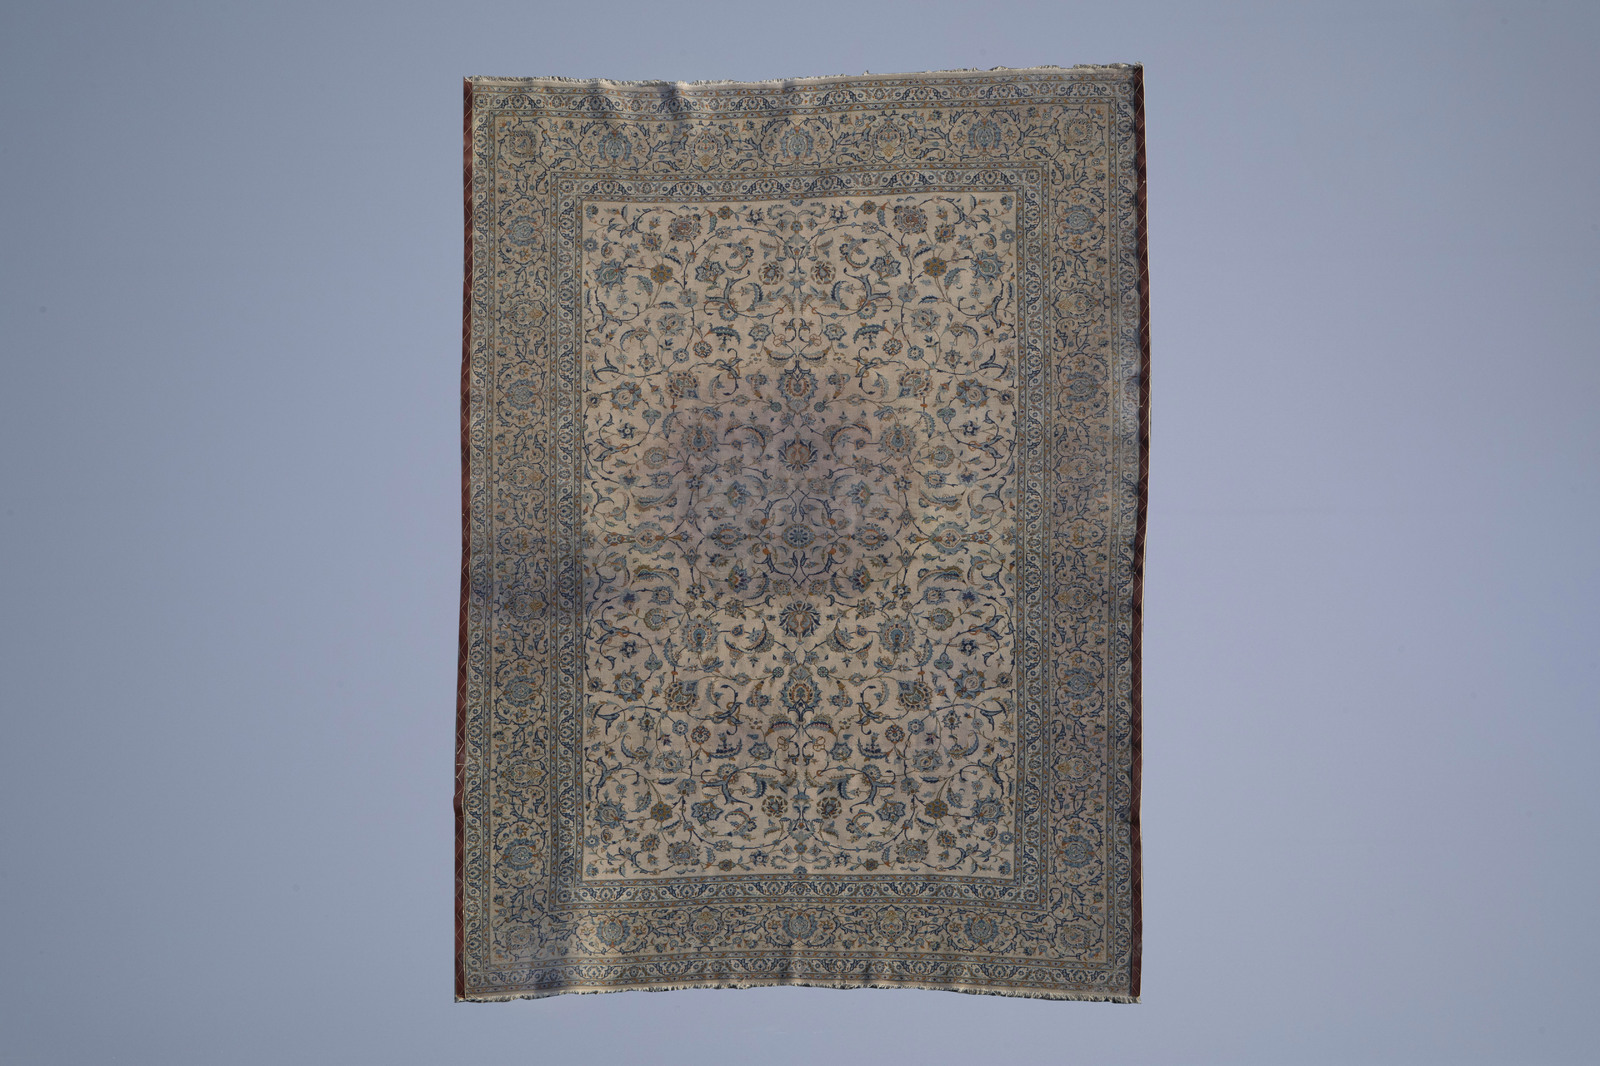 A large Oriental rug with floral design, wool on cotton, 20th C. - Image 2 of 3